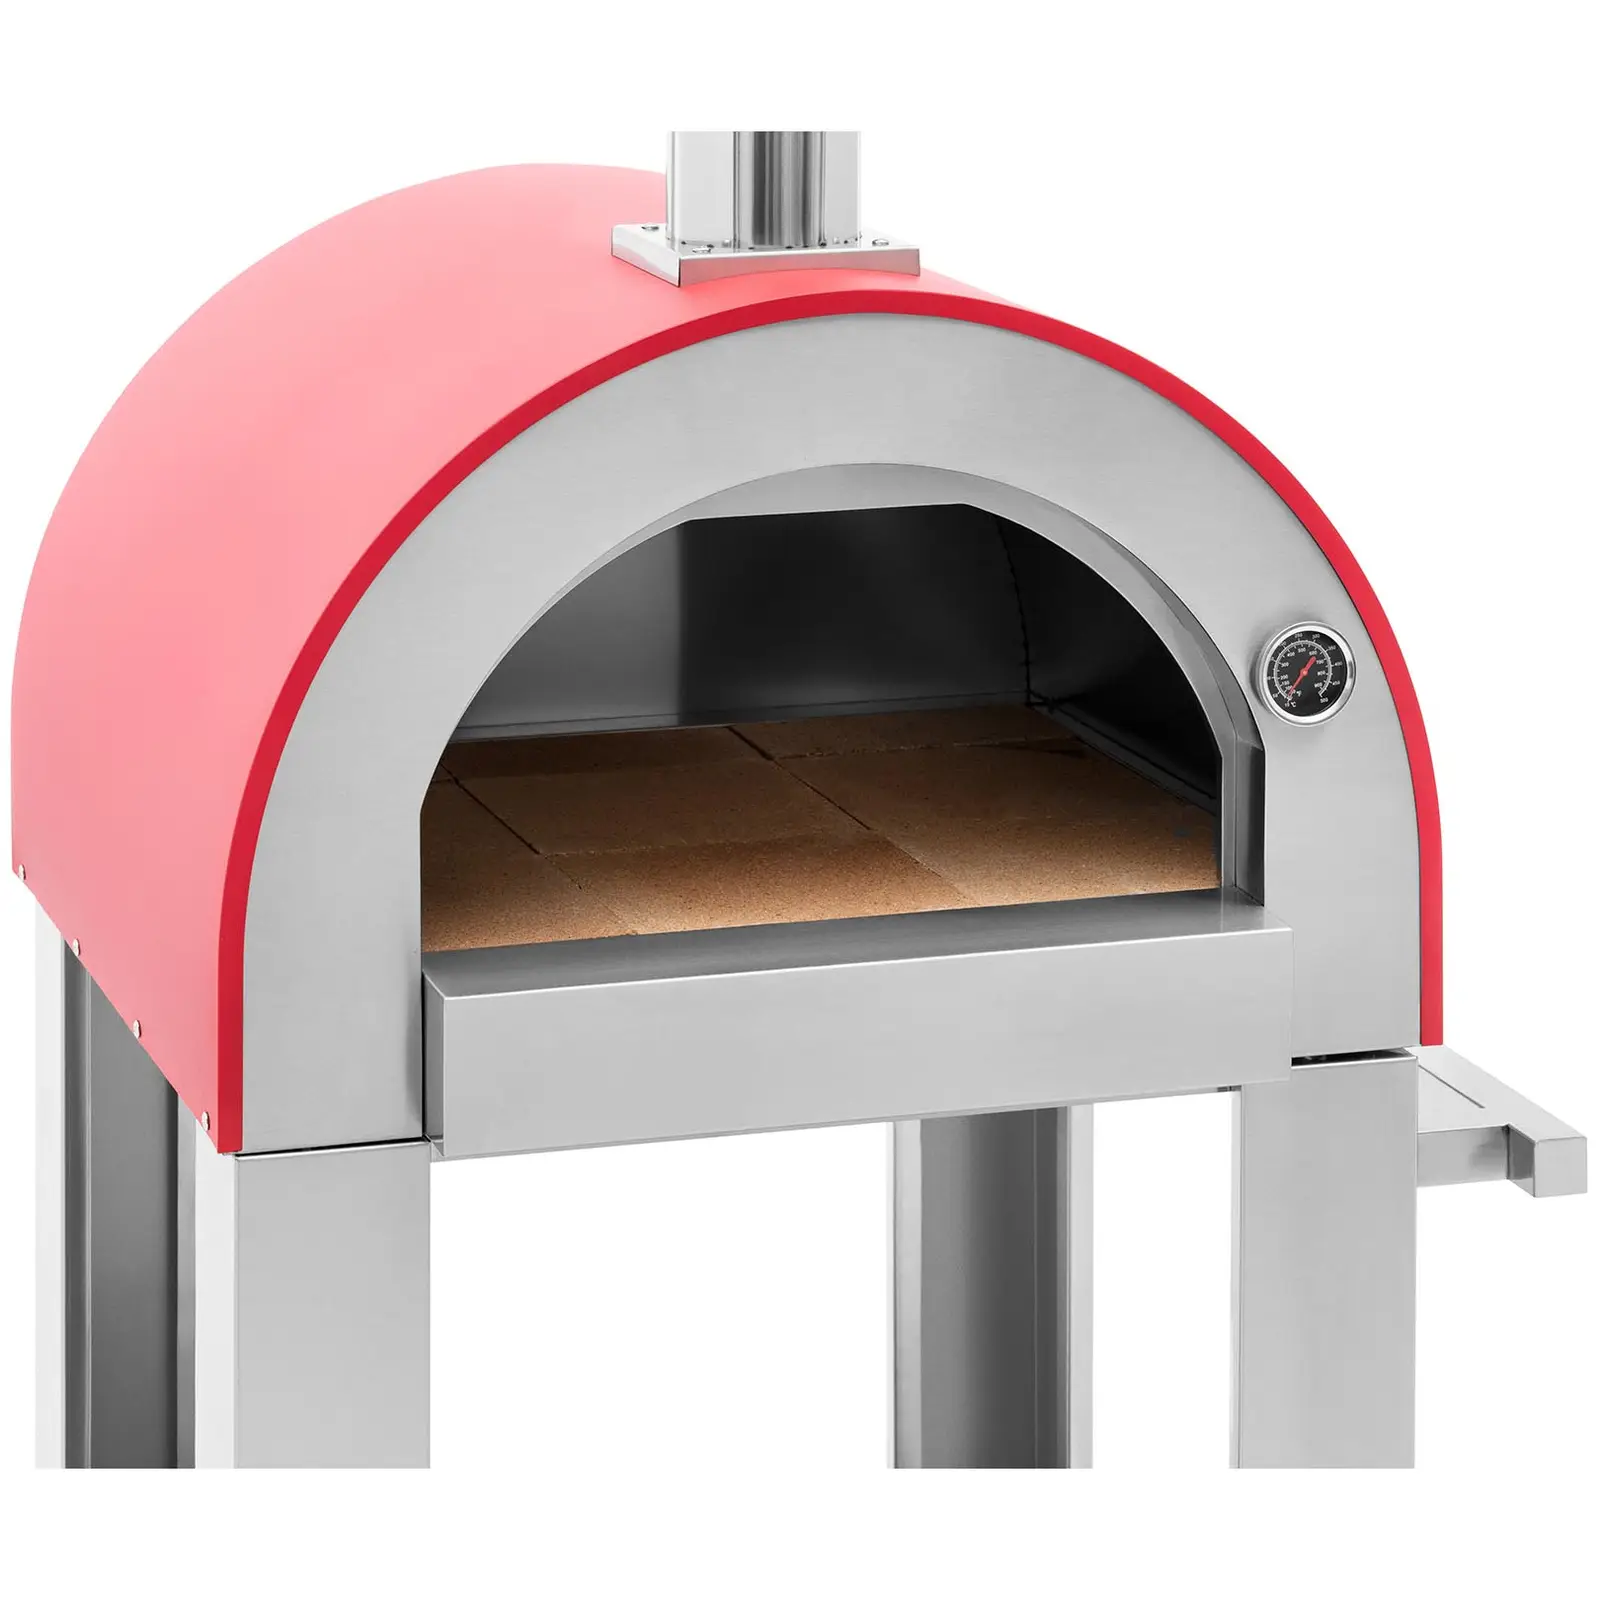 Wood Fired Pizza Oven - clay plate - 220 ° C - Ø 40.5 cm - Royal Catering